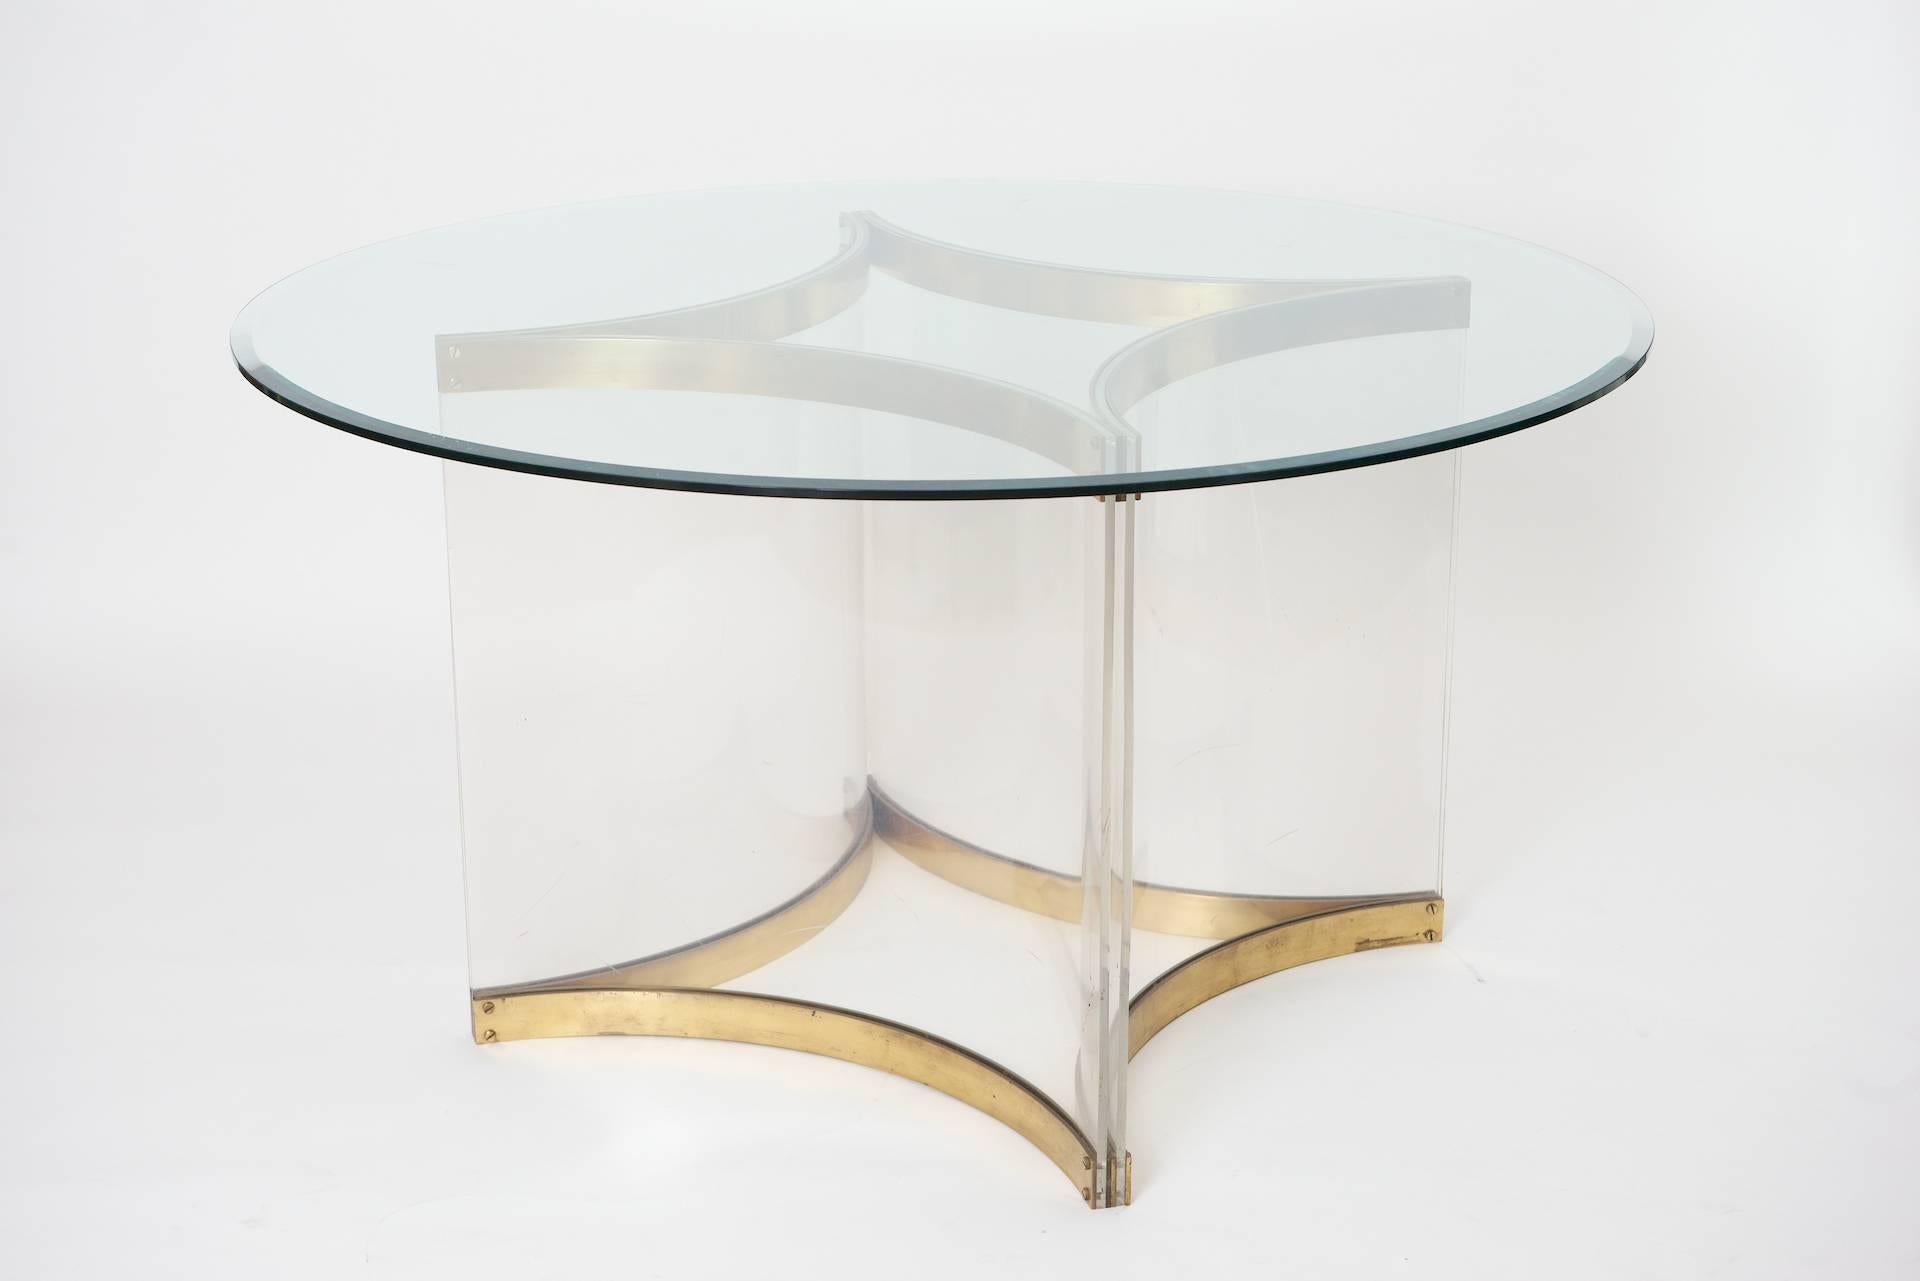 Alessandro Albrizzi circular table.
Curved Lucite base with brass.

The lucite and brass base can take a larger top if necessary. The shape could also be changed if desired. Can be circular, square, hexagonal or rectangular.

This table can be